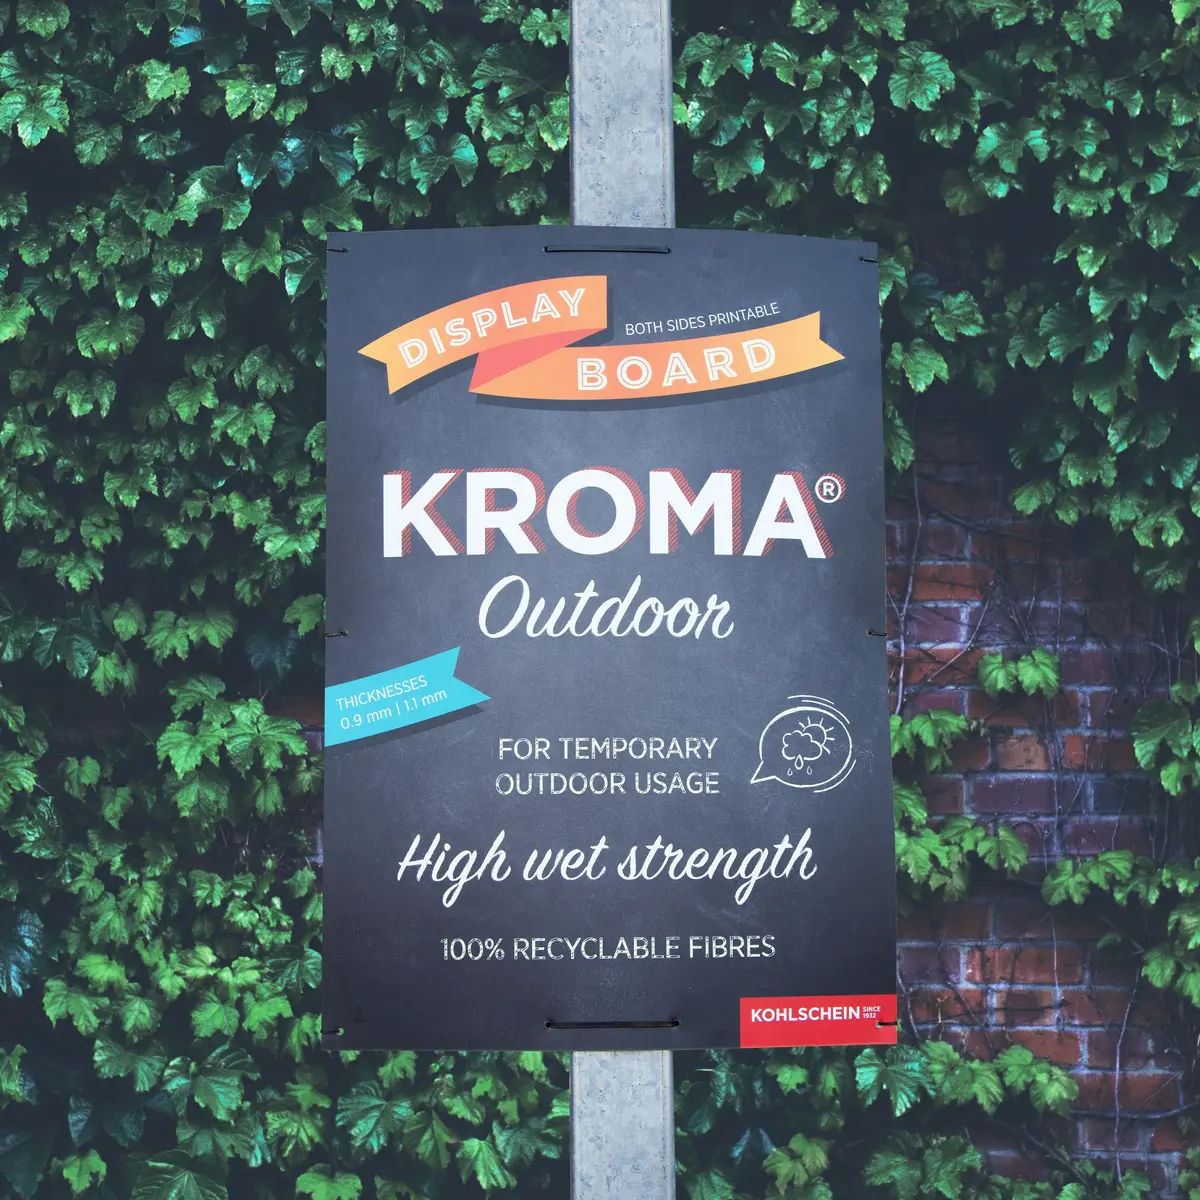 Cardboard KROMA Outdoor application example outdoor poster